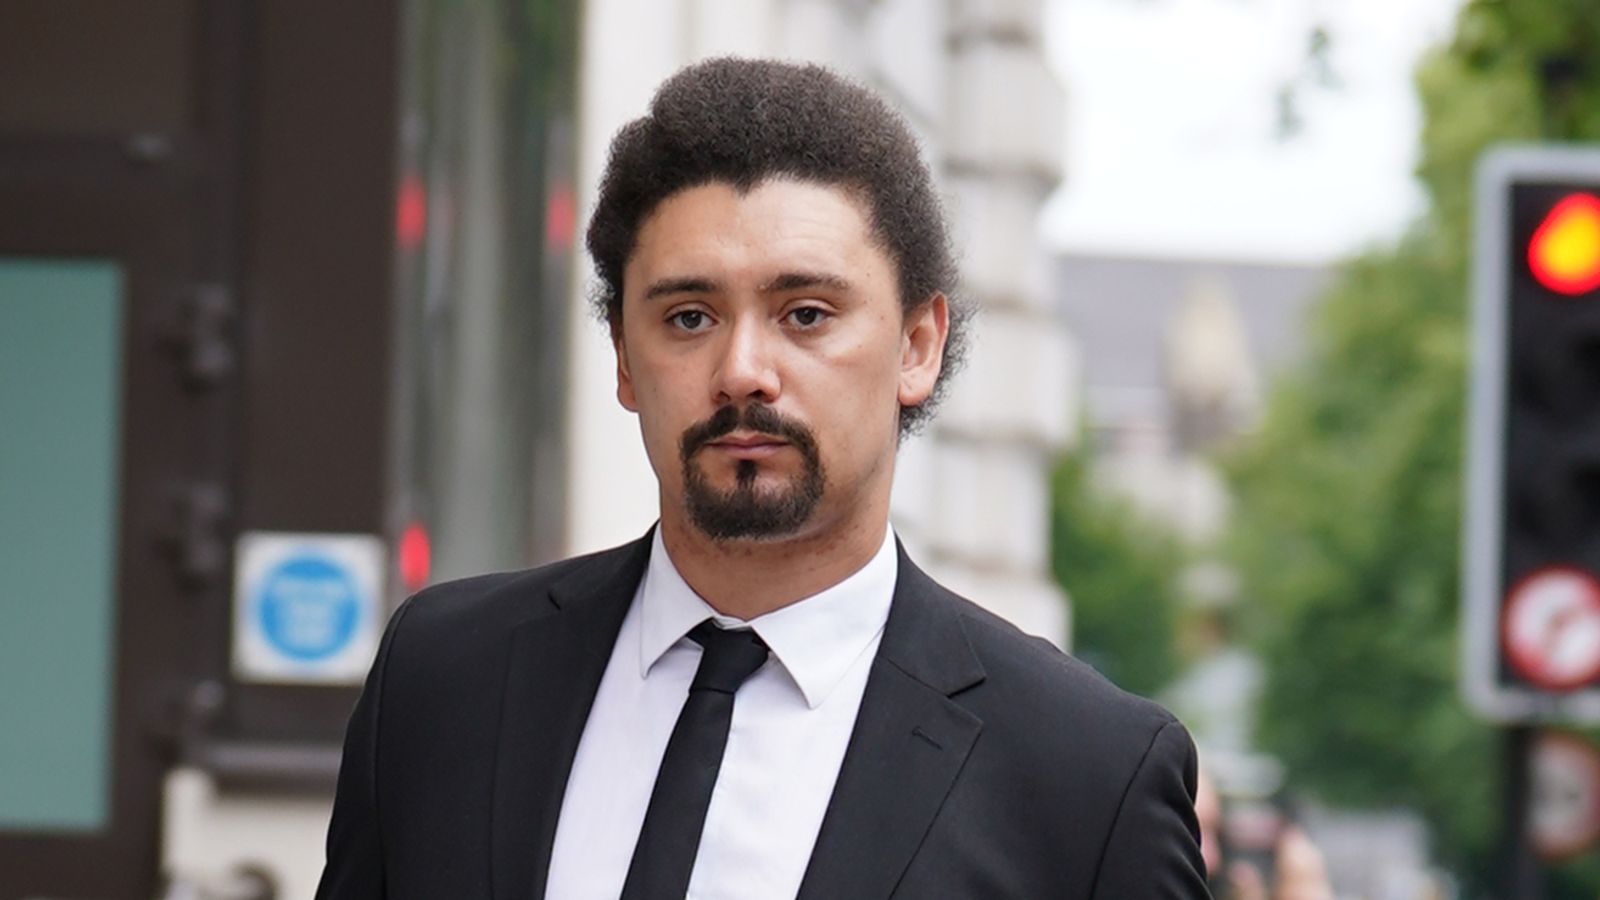 Jade Ebanks: Former Metropolitan Police officer appears in court charged with raping woman before he joined force